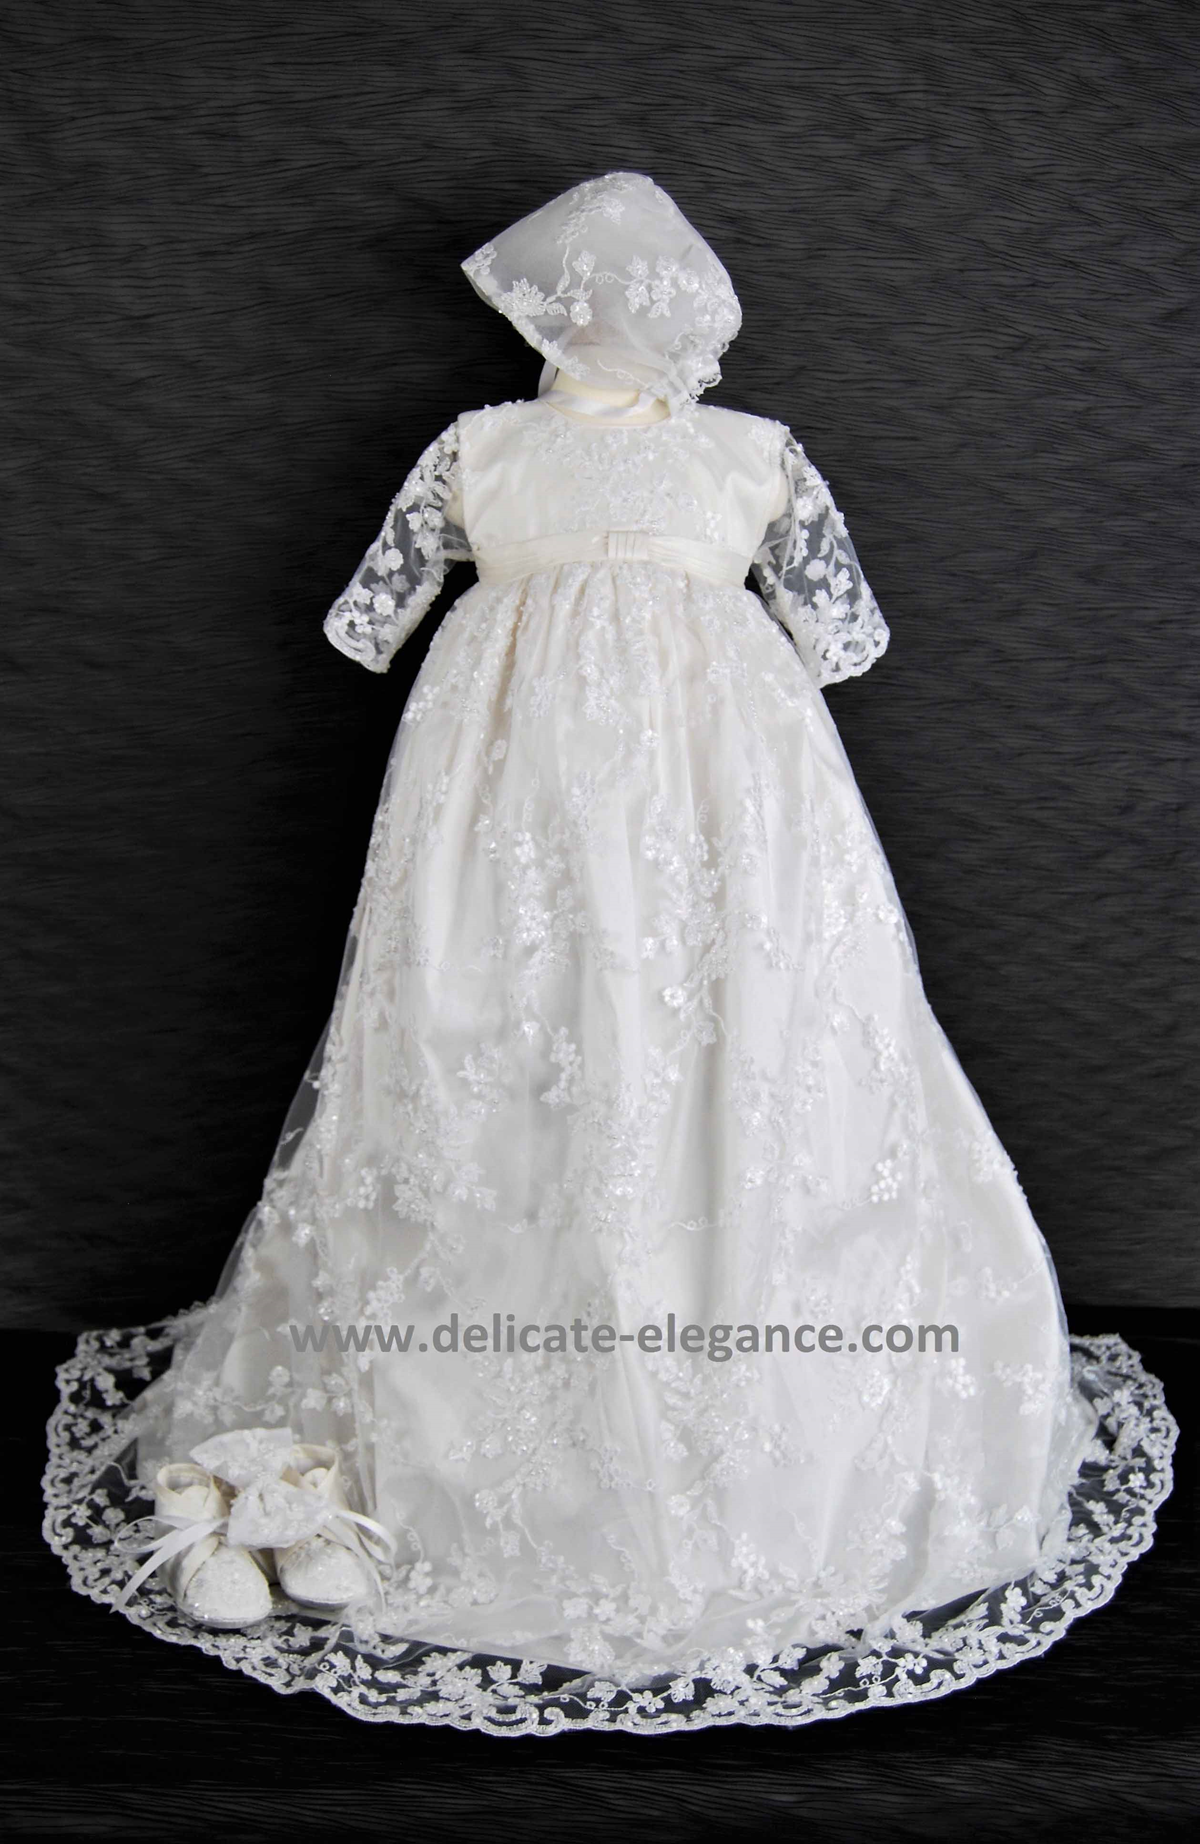 4239 - 01 Eleanor Baptism/Christening Gown